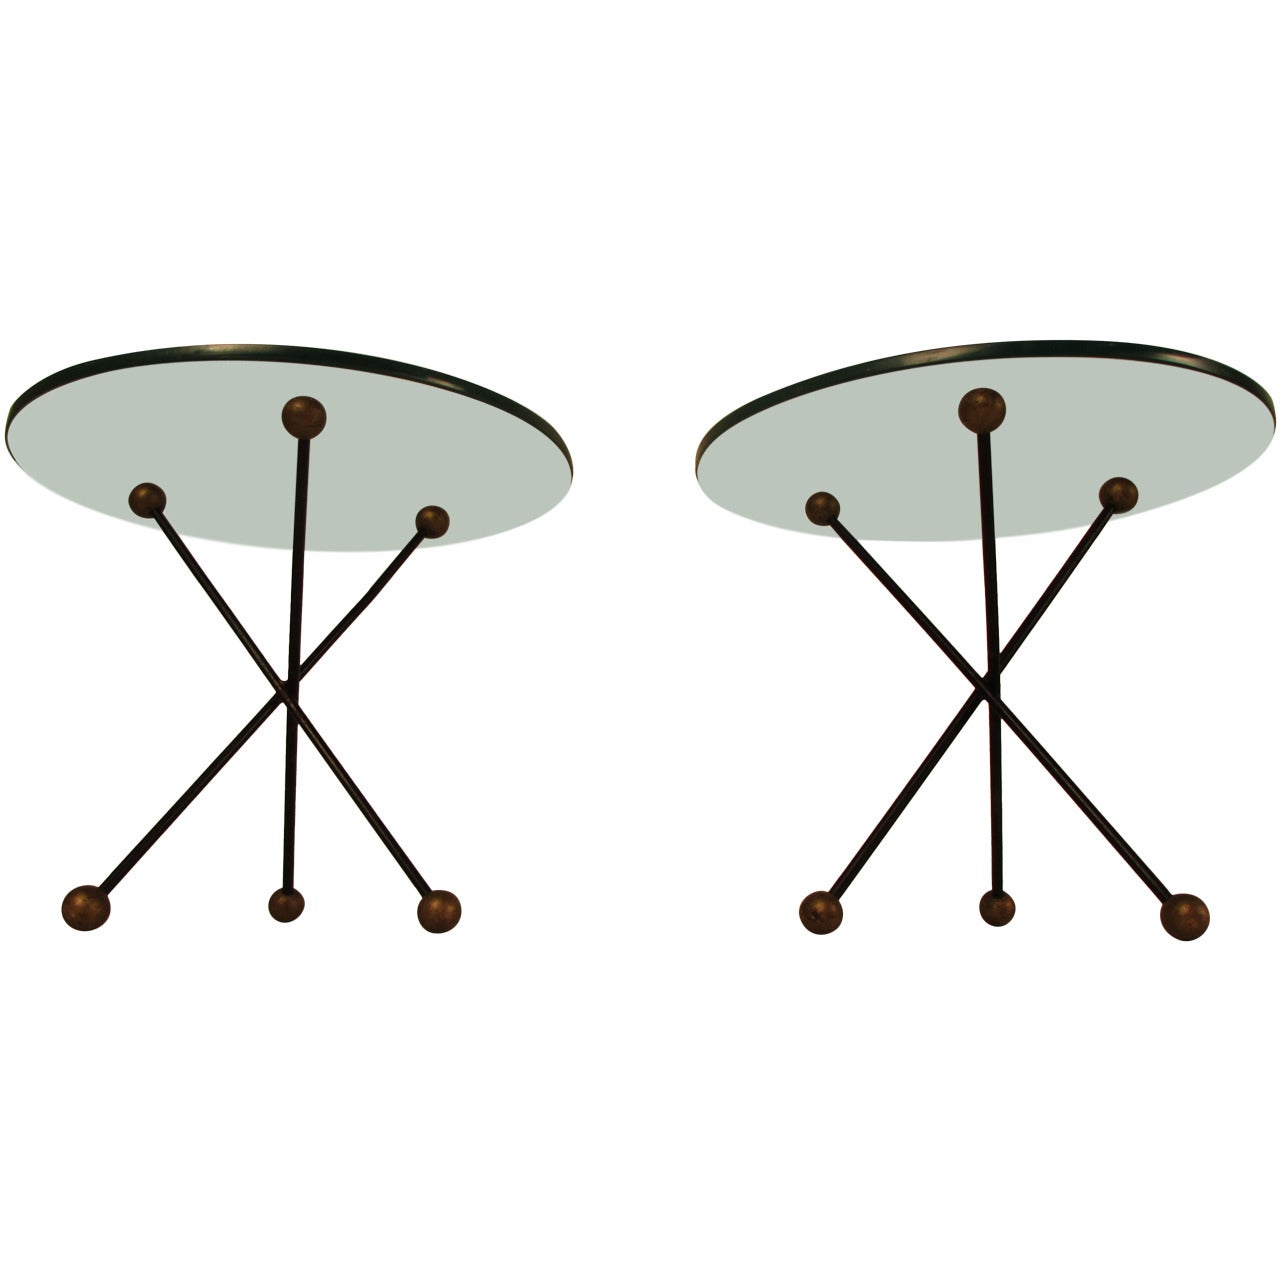 Pair of Sculptural Midcentury French Side Tables